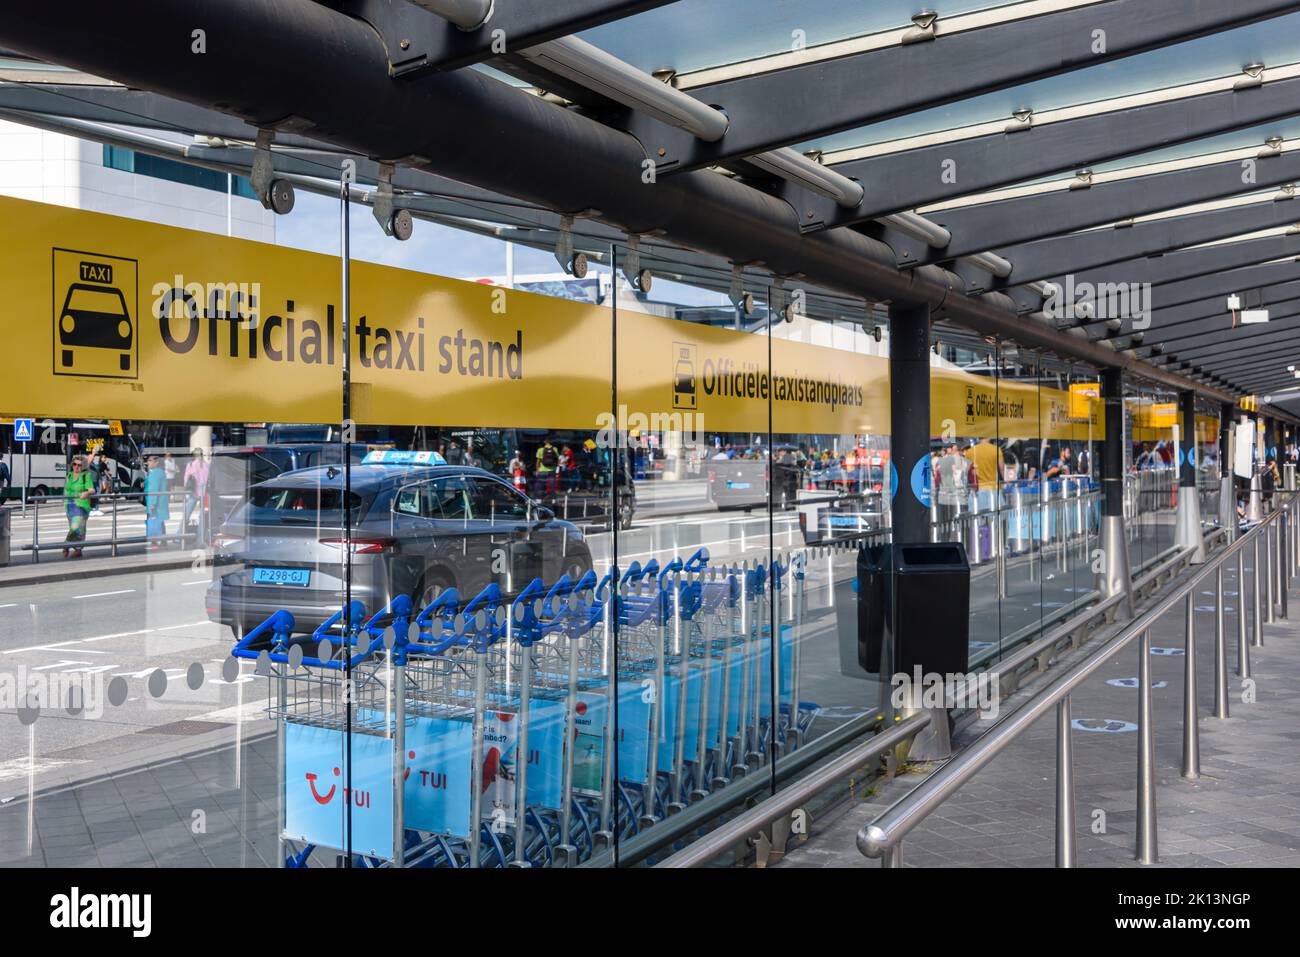 Official taxi stand, Schiphol Airport, Netherlands Stock Photo